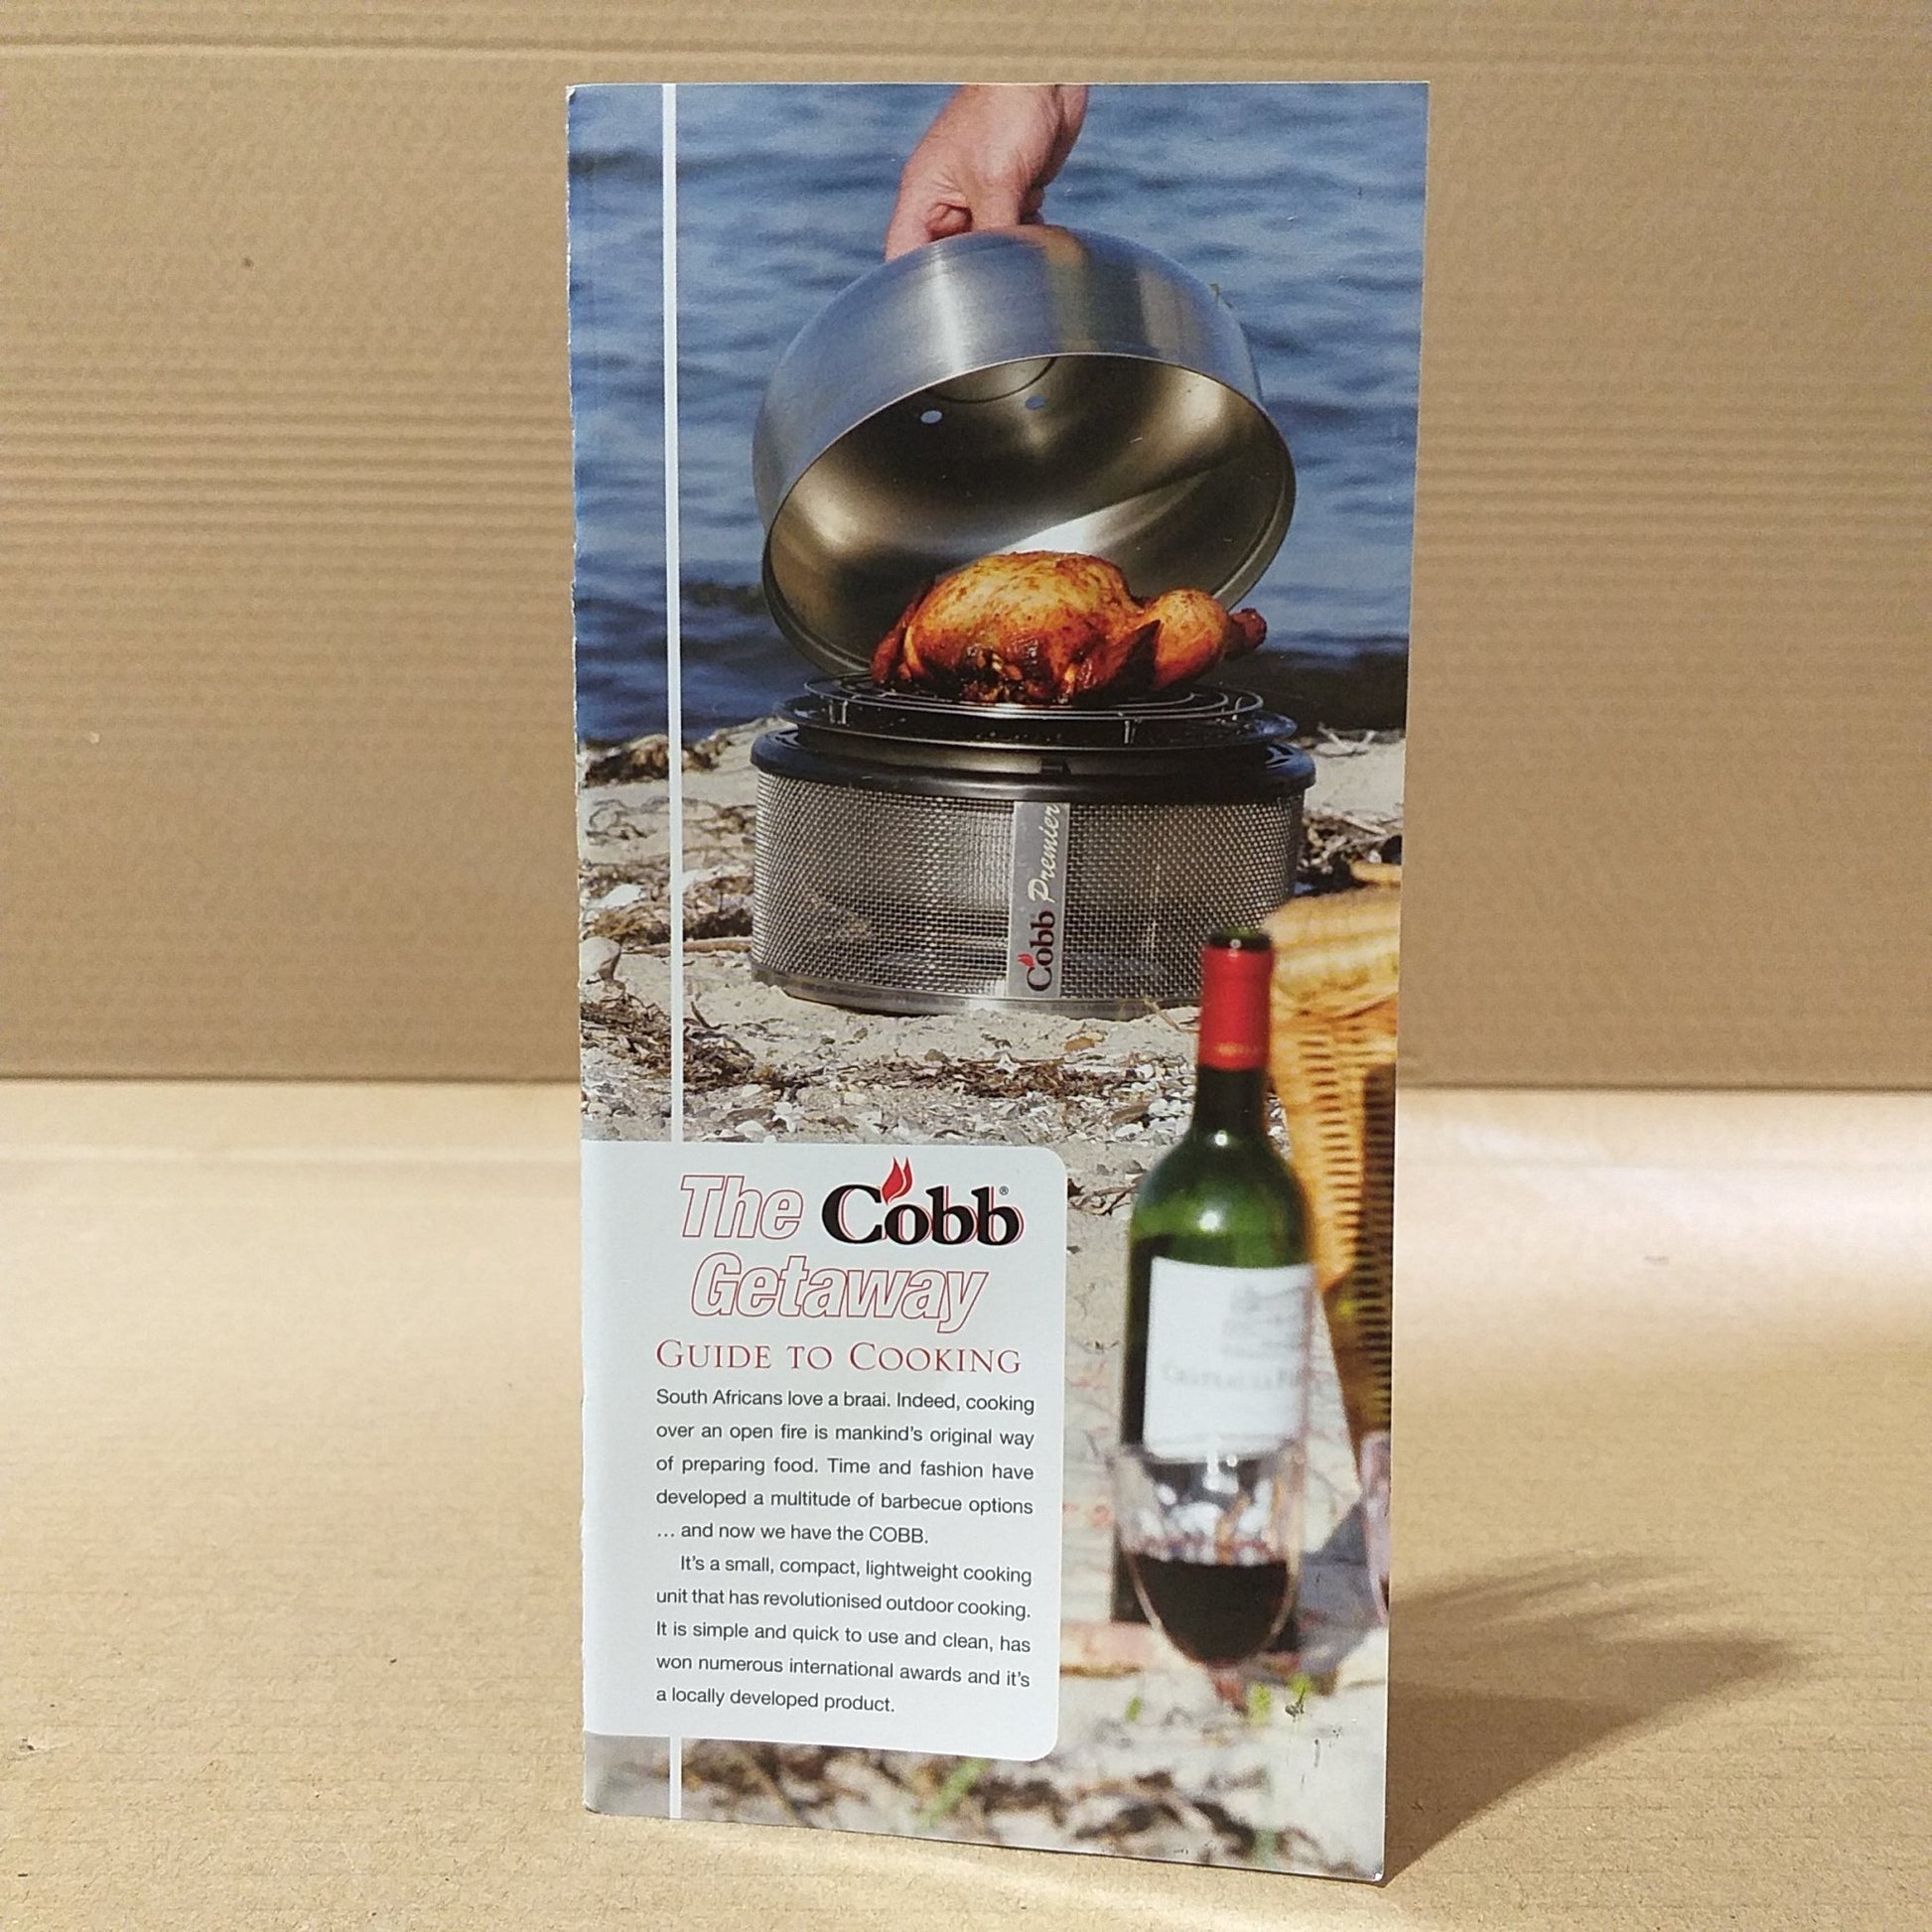 The Cobb Getaway Guide to Cooking Book & Recipes - Lifespace